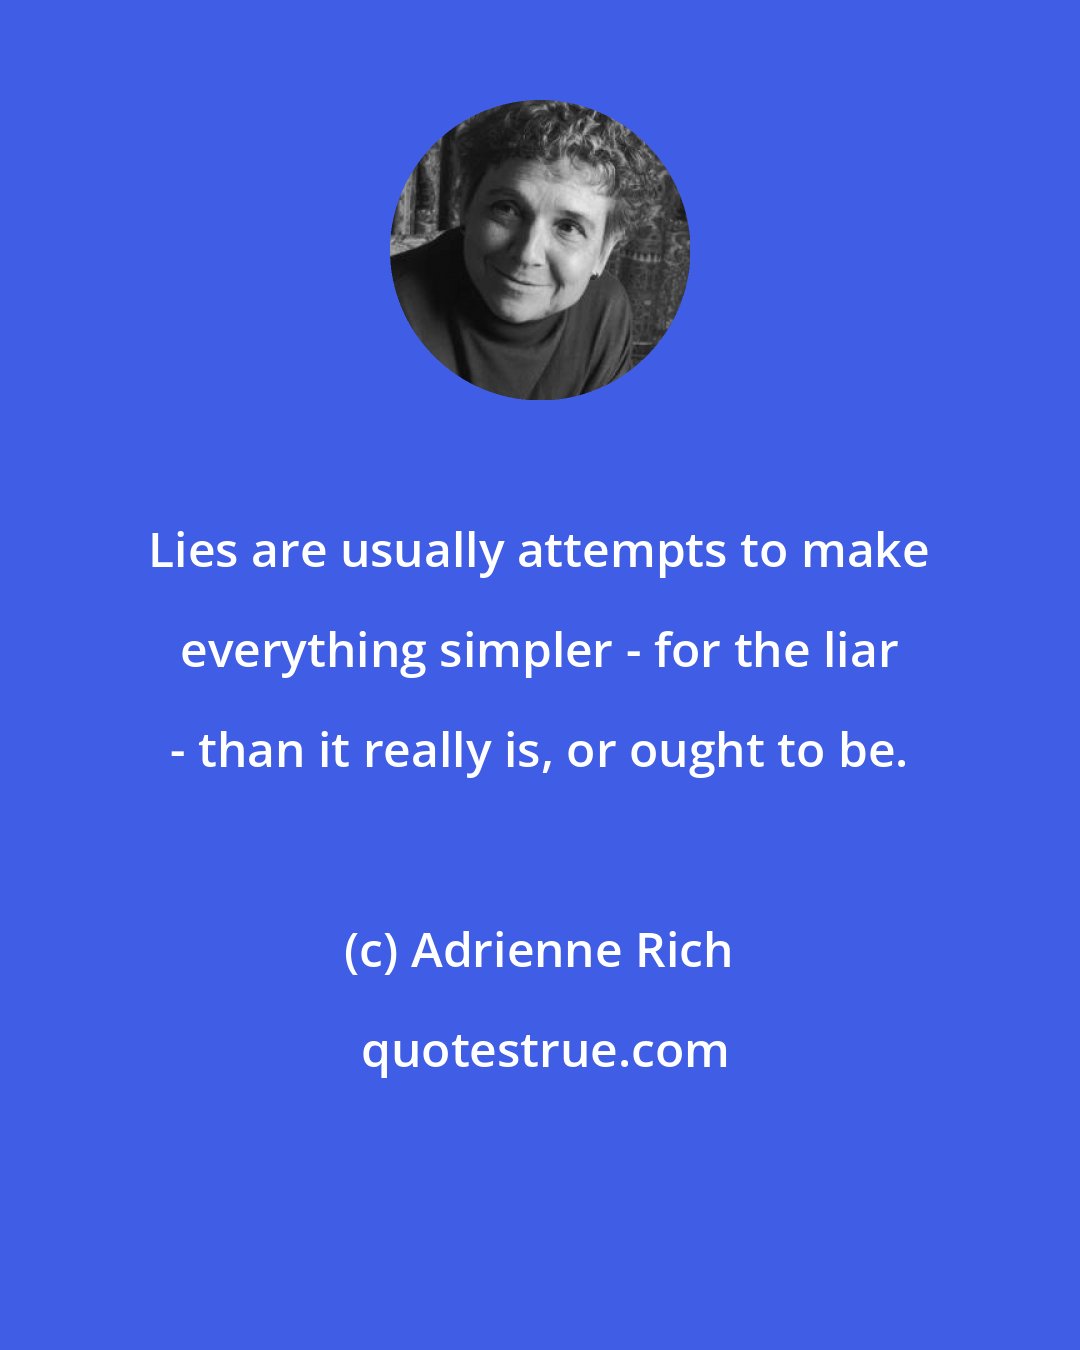 Adrienne Rich: Lies are usually attempts to make everything simpler - for the liar - than it really is, or ought to be.